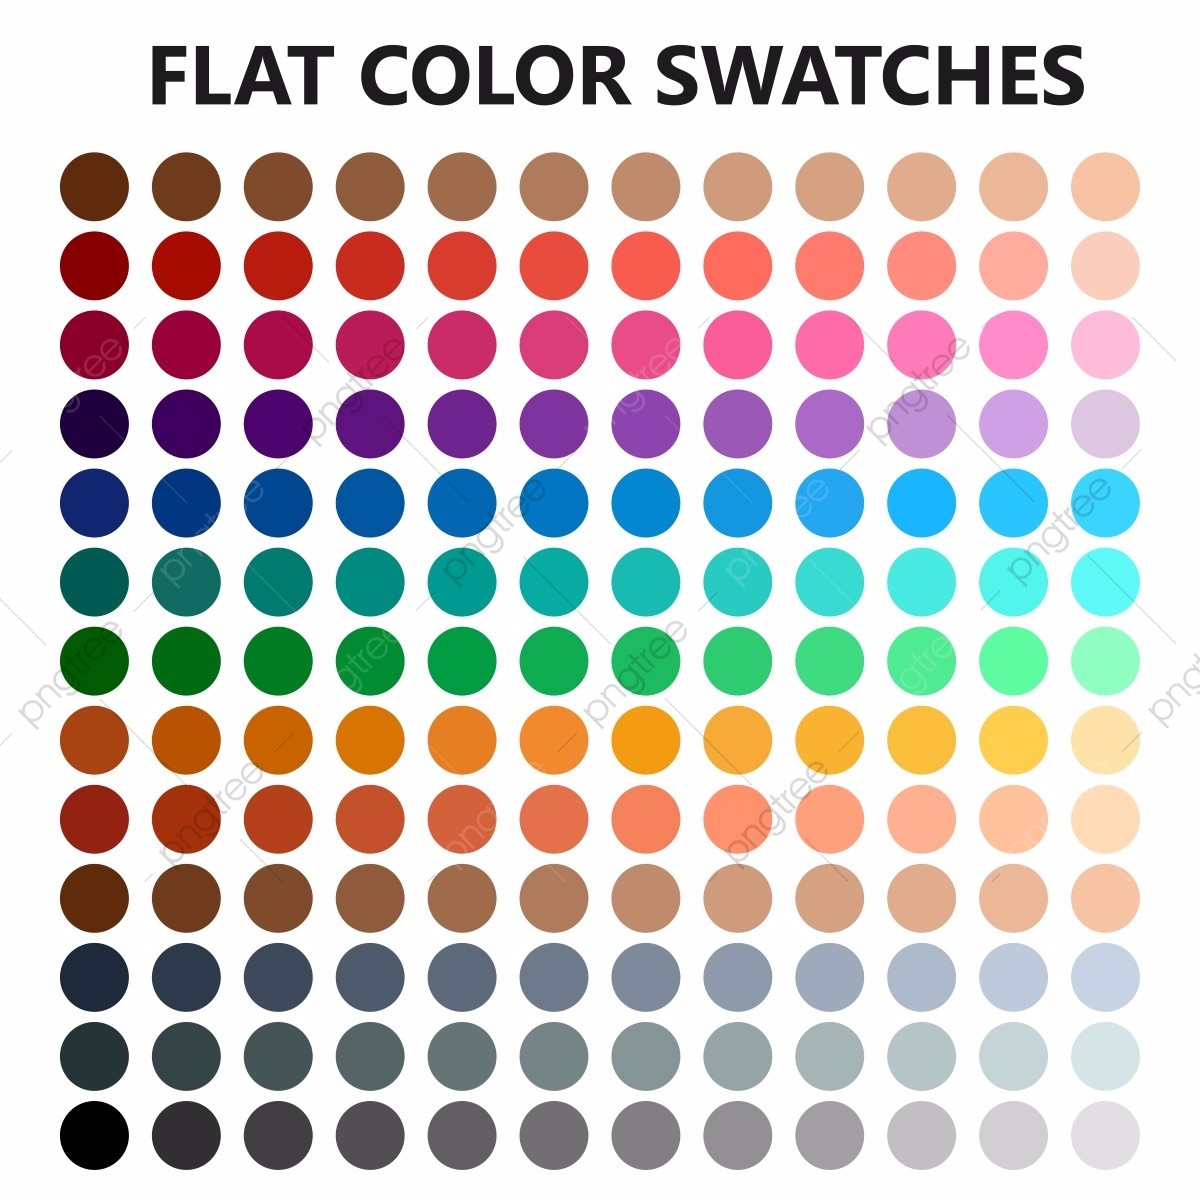 swatches for illustrator free download